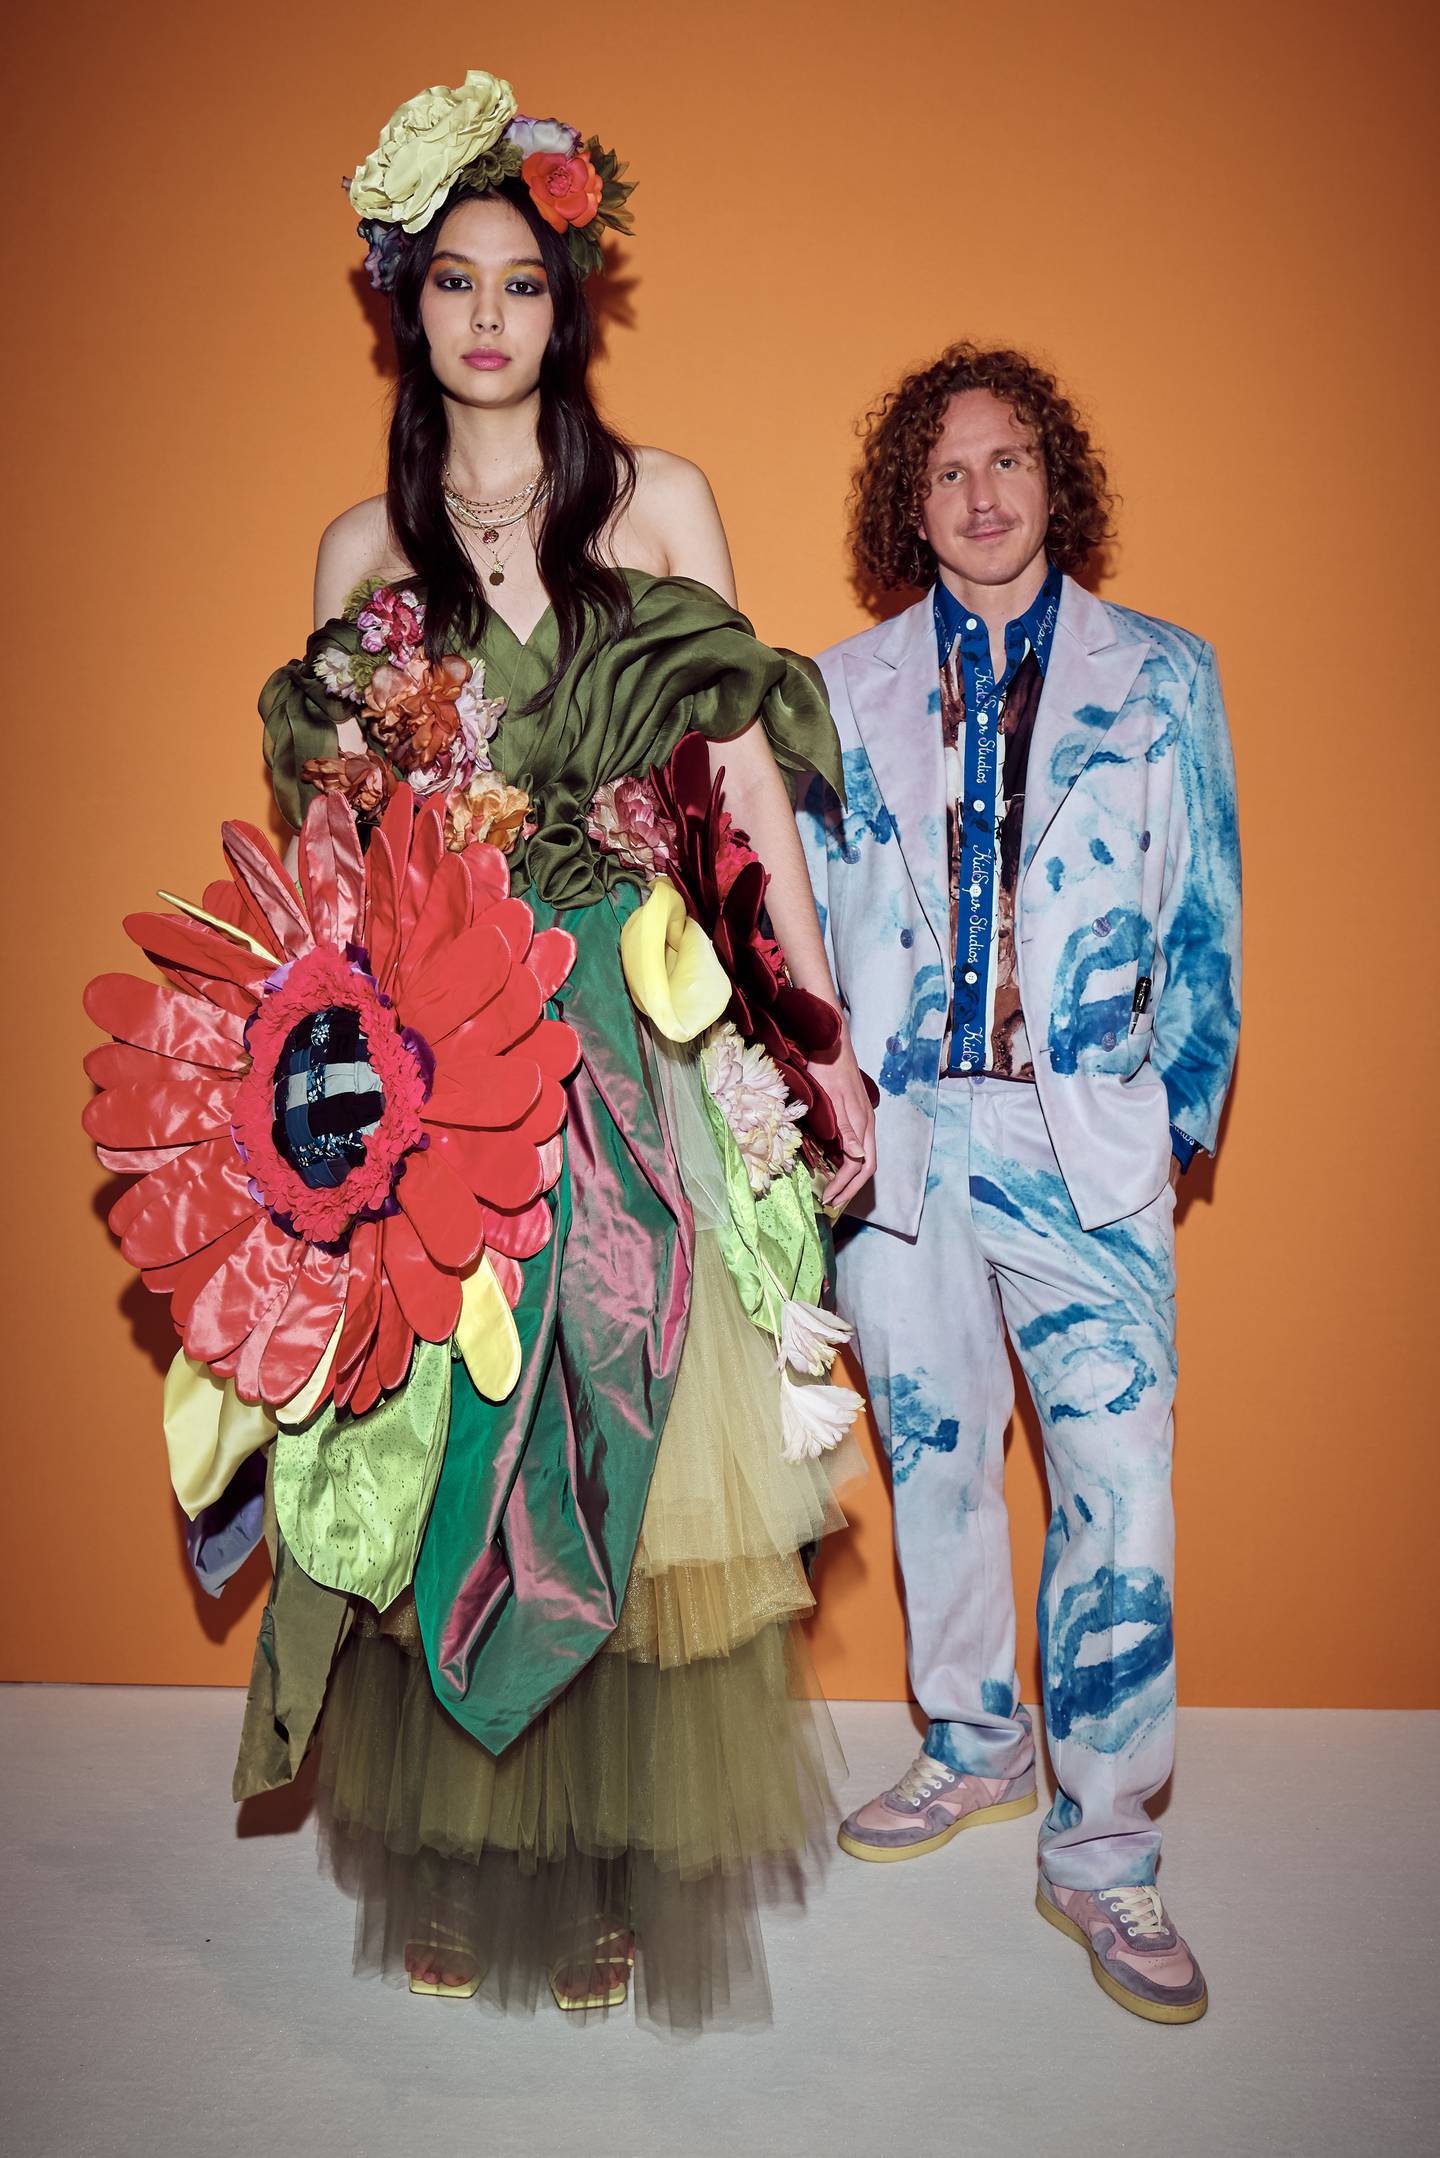 KidSuper designer Colm Dillane poses with a model at the LVMH Prize ceremony in 2021.